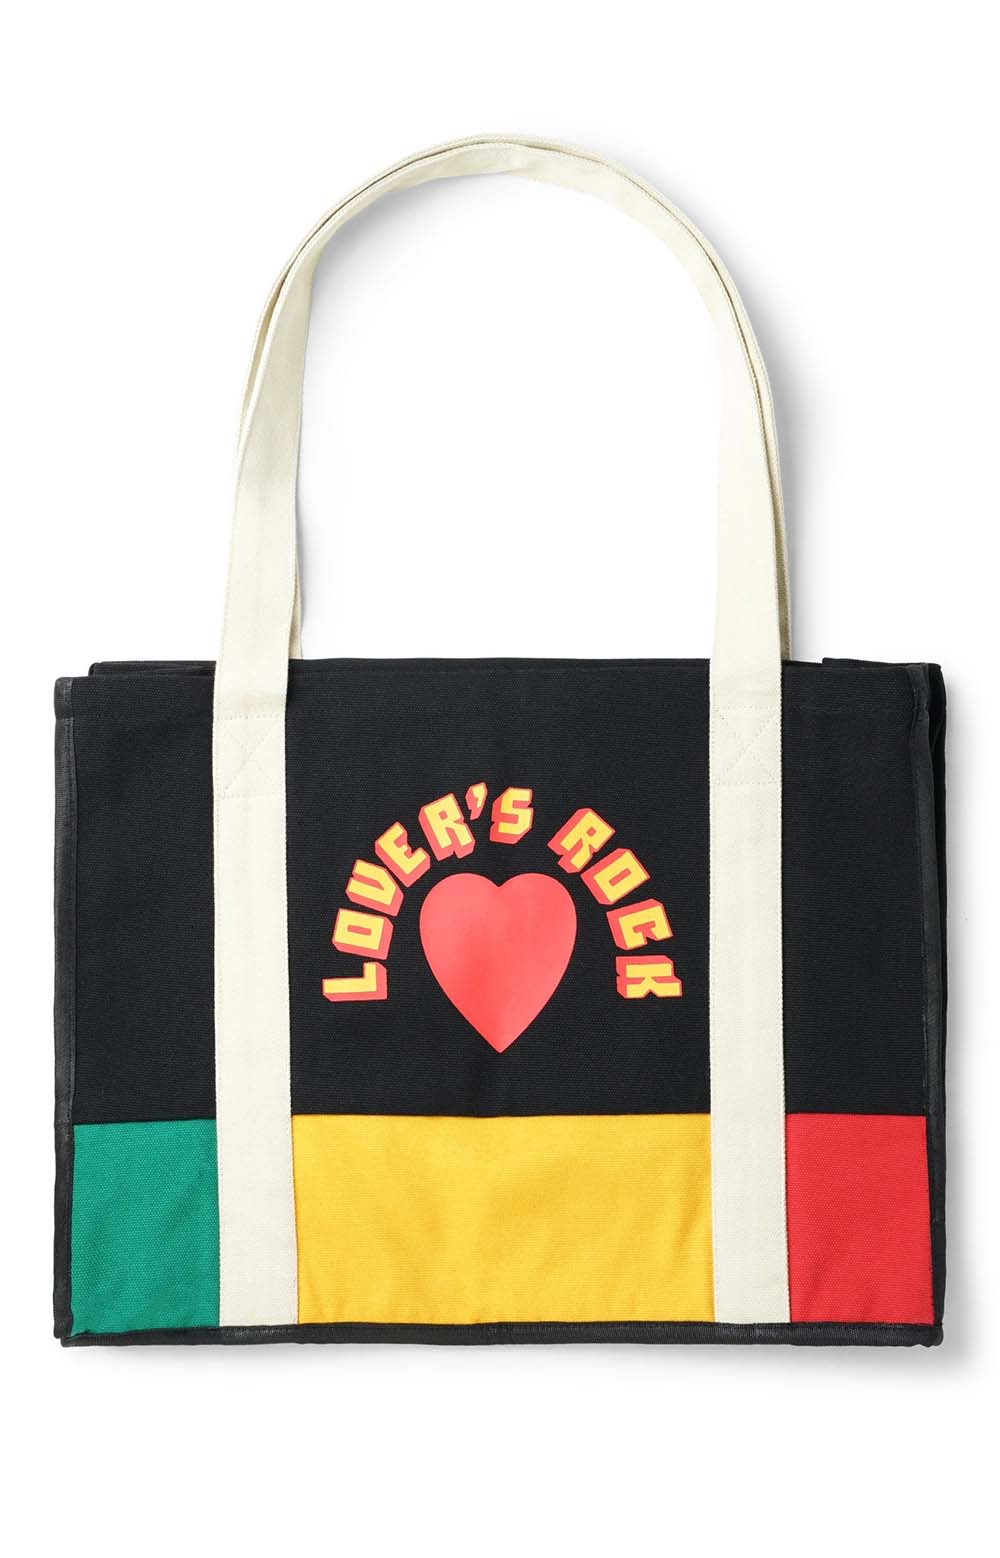 Lovers Rock Record Bag